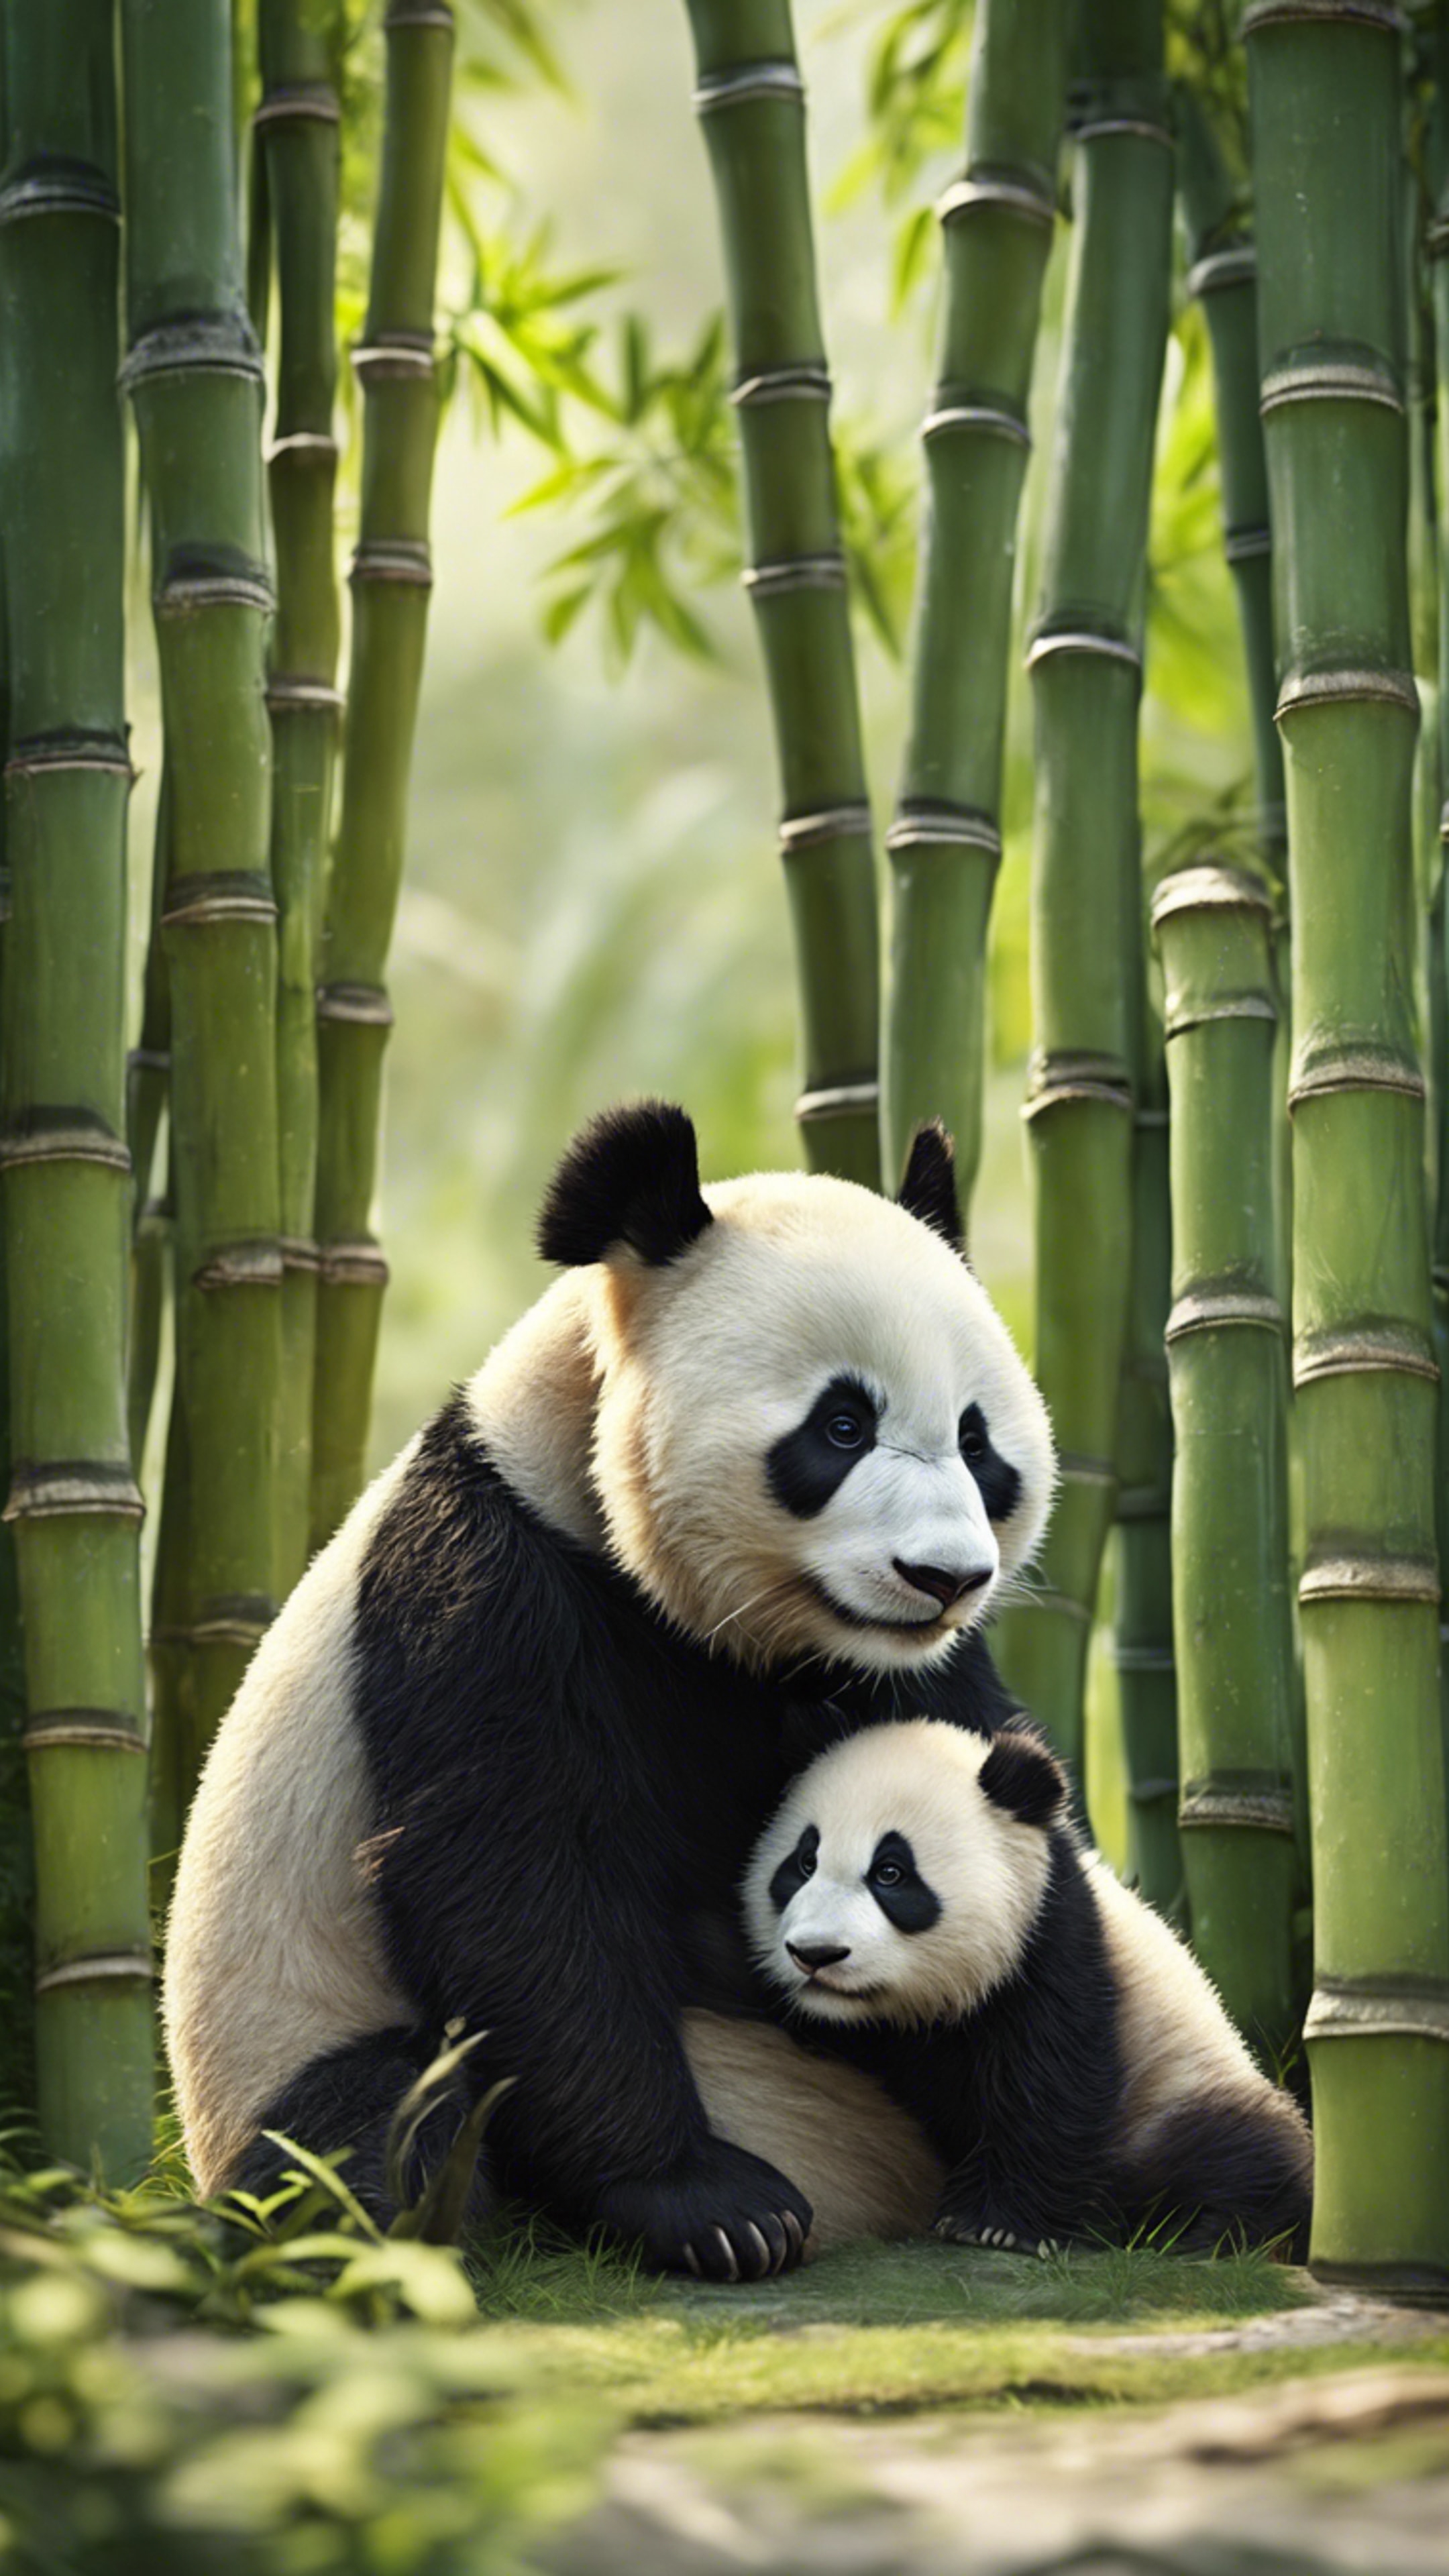 A mother panda teaching her cub to climb a bamboo tree in a tranquil jungle setting. Валлпапер[bf956daca53d4d23a107]